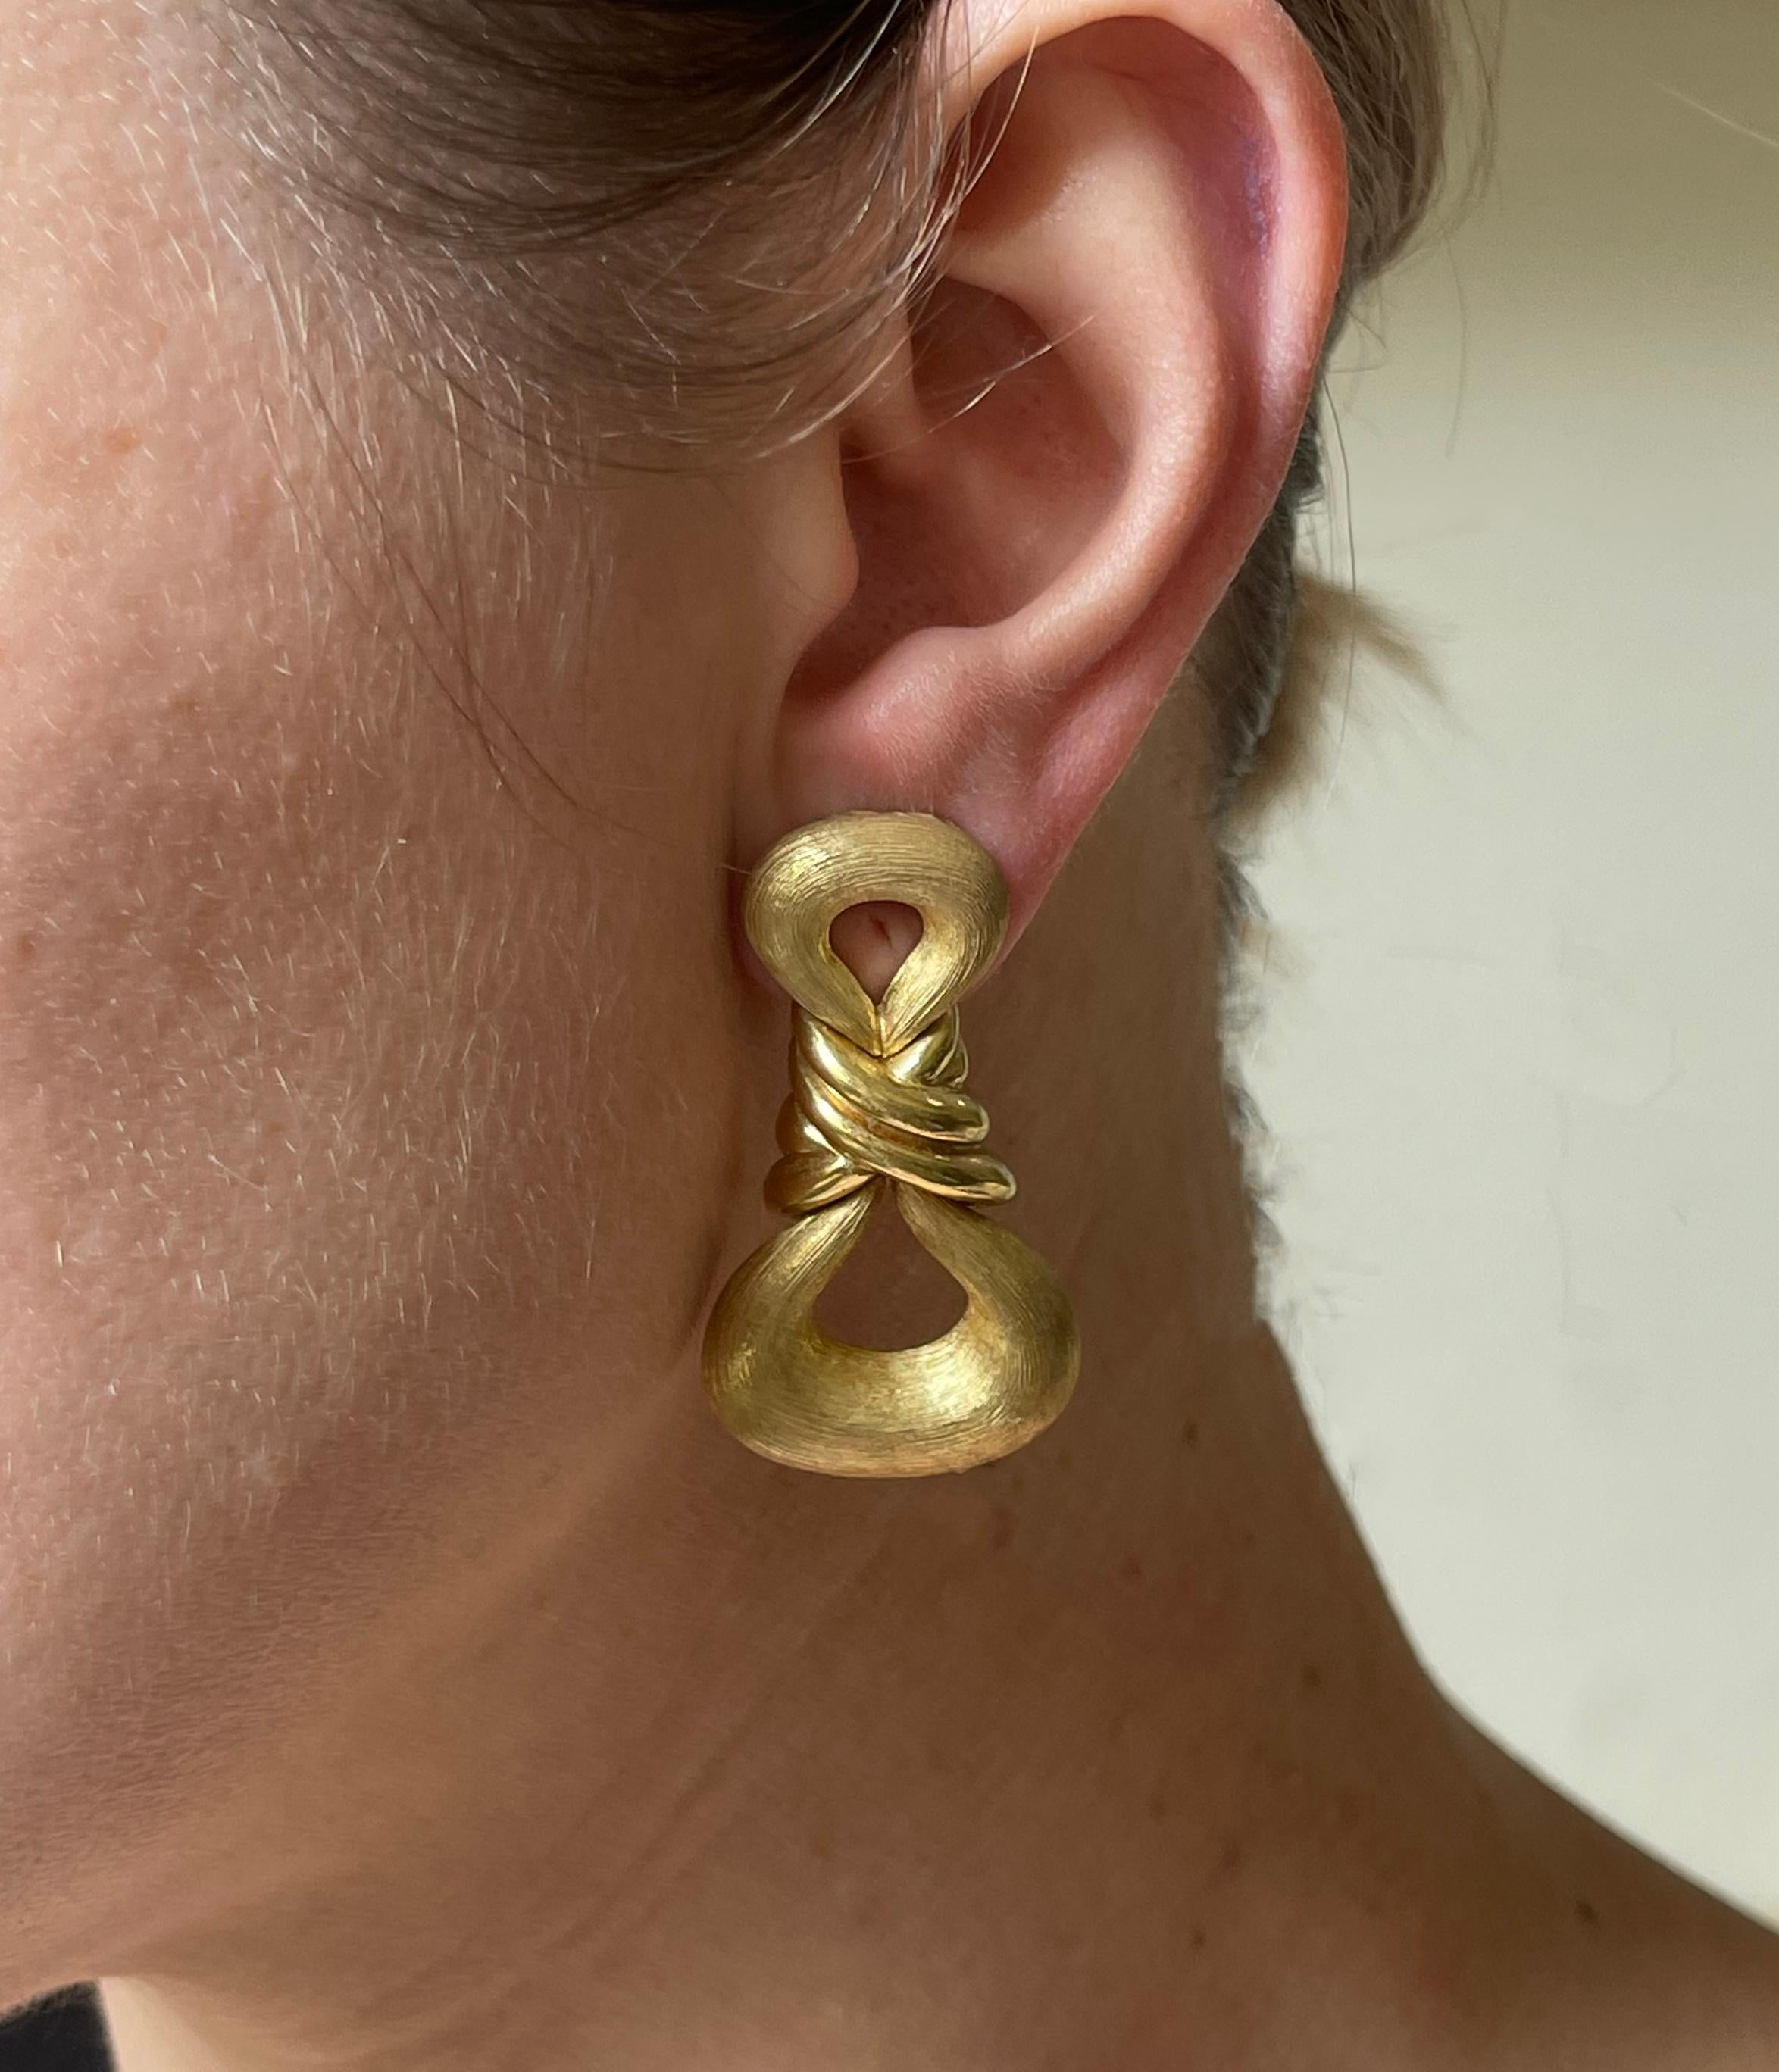 Pair of 18k gold earrings by Henry Dunay, with signature recognizable brushed finish, alternating with high polish. The earrings measure 1.75